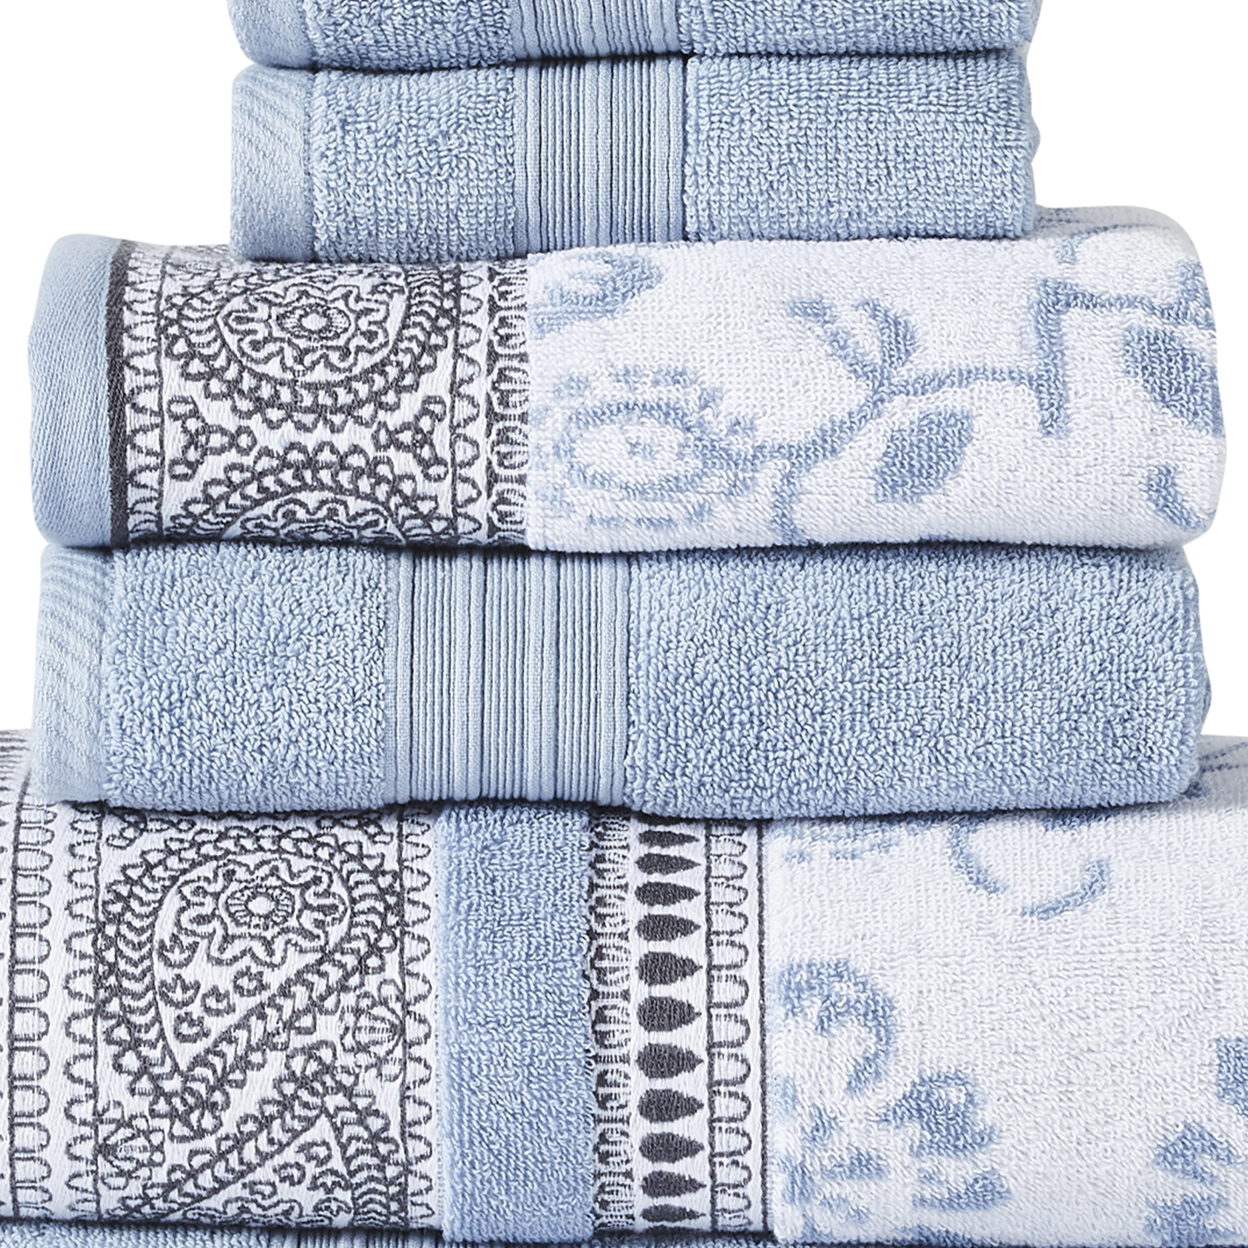 Veria 6 Piece Towel Set With Paisley And Floral Pattern The Urban Port, Blue- Saltoro Sherpi